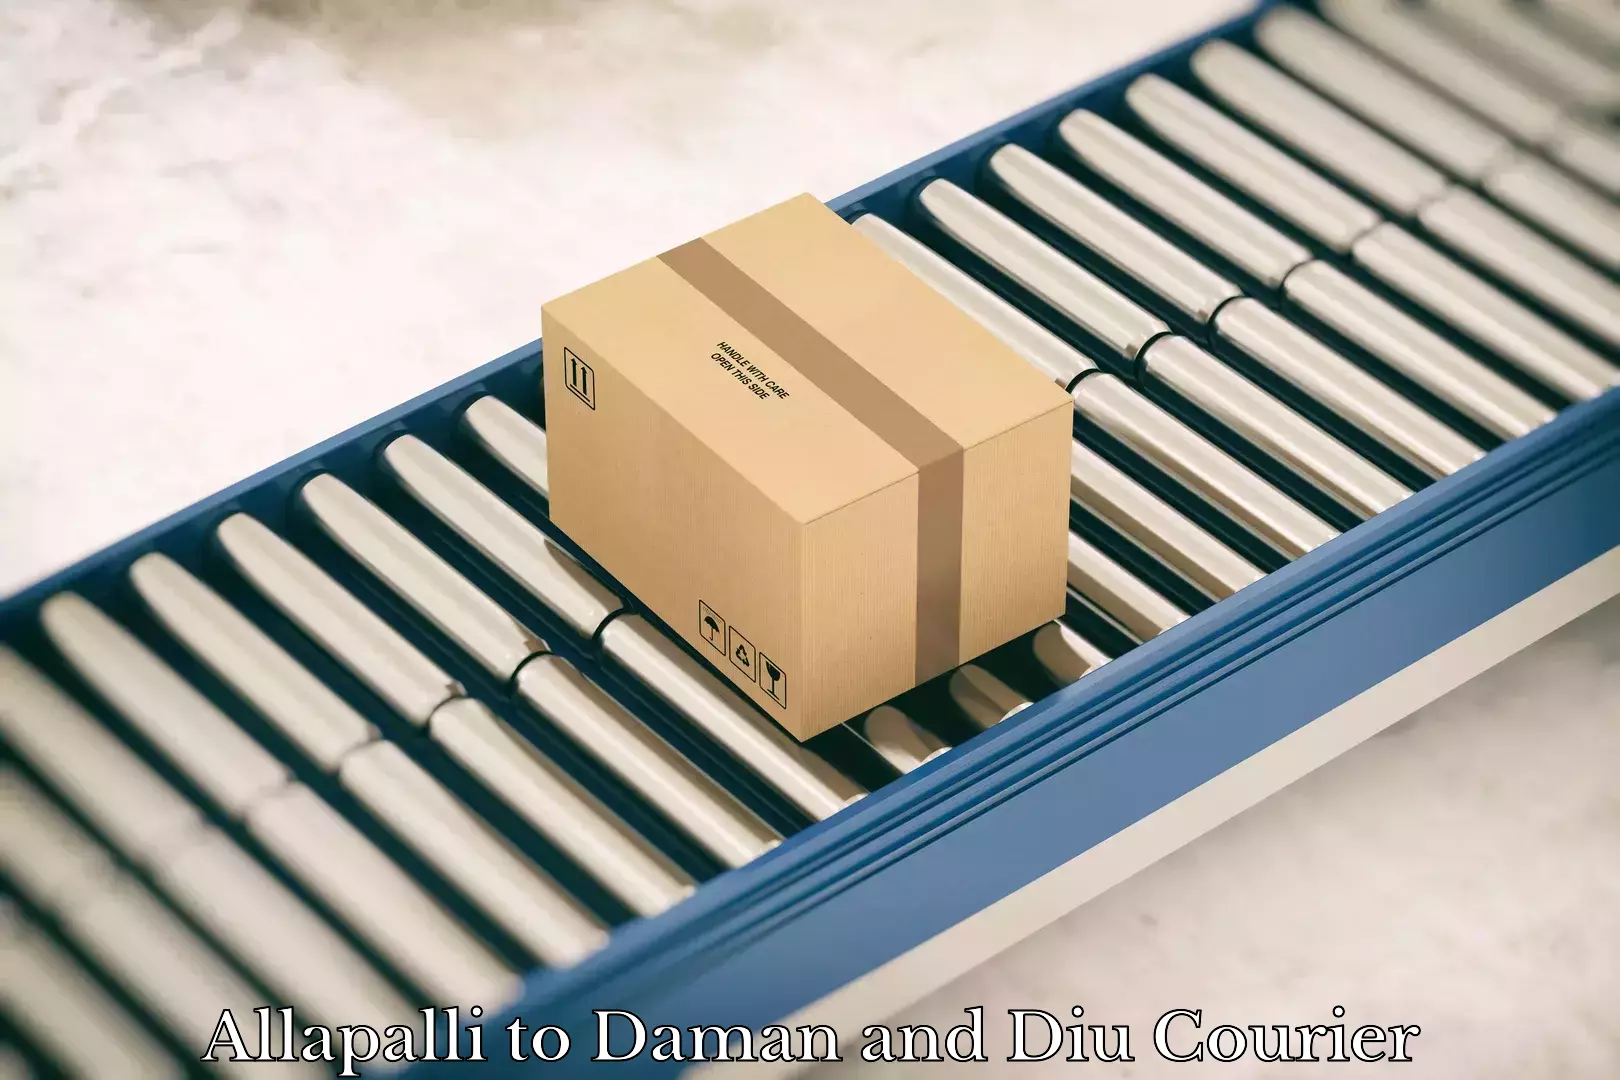 Smart parcel tracking Allapalli to Daman and Diu